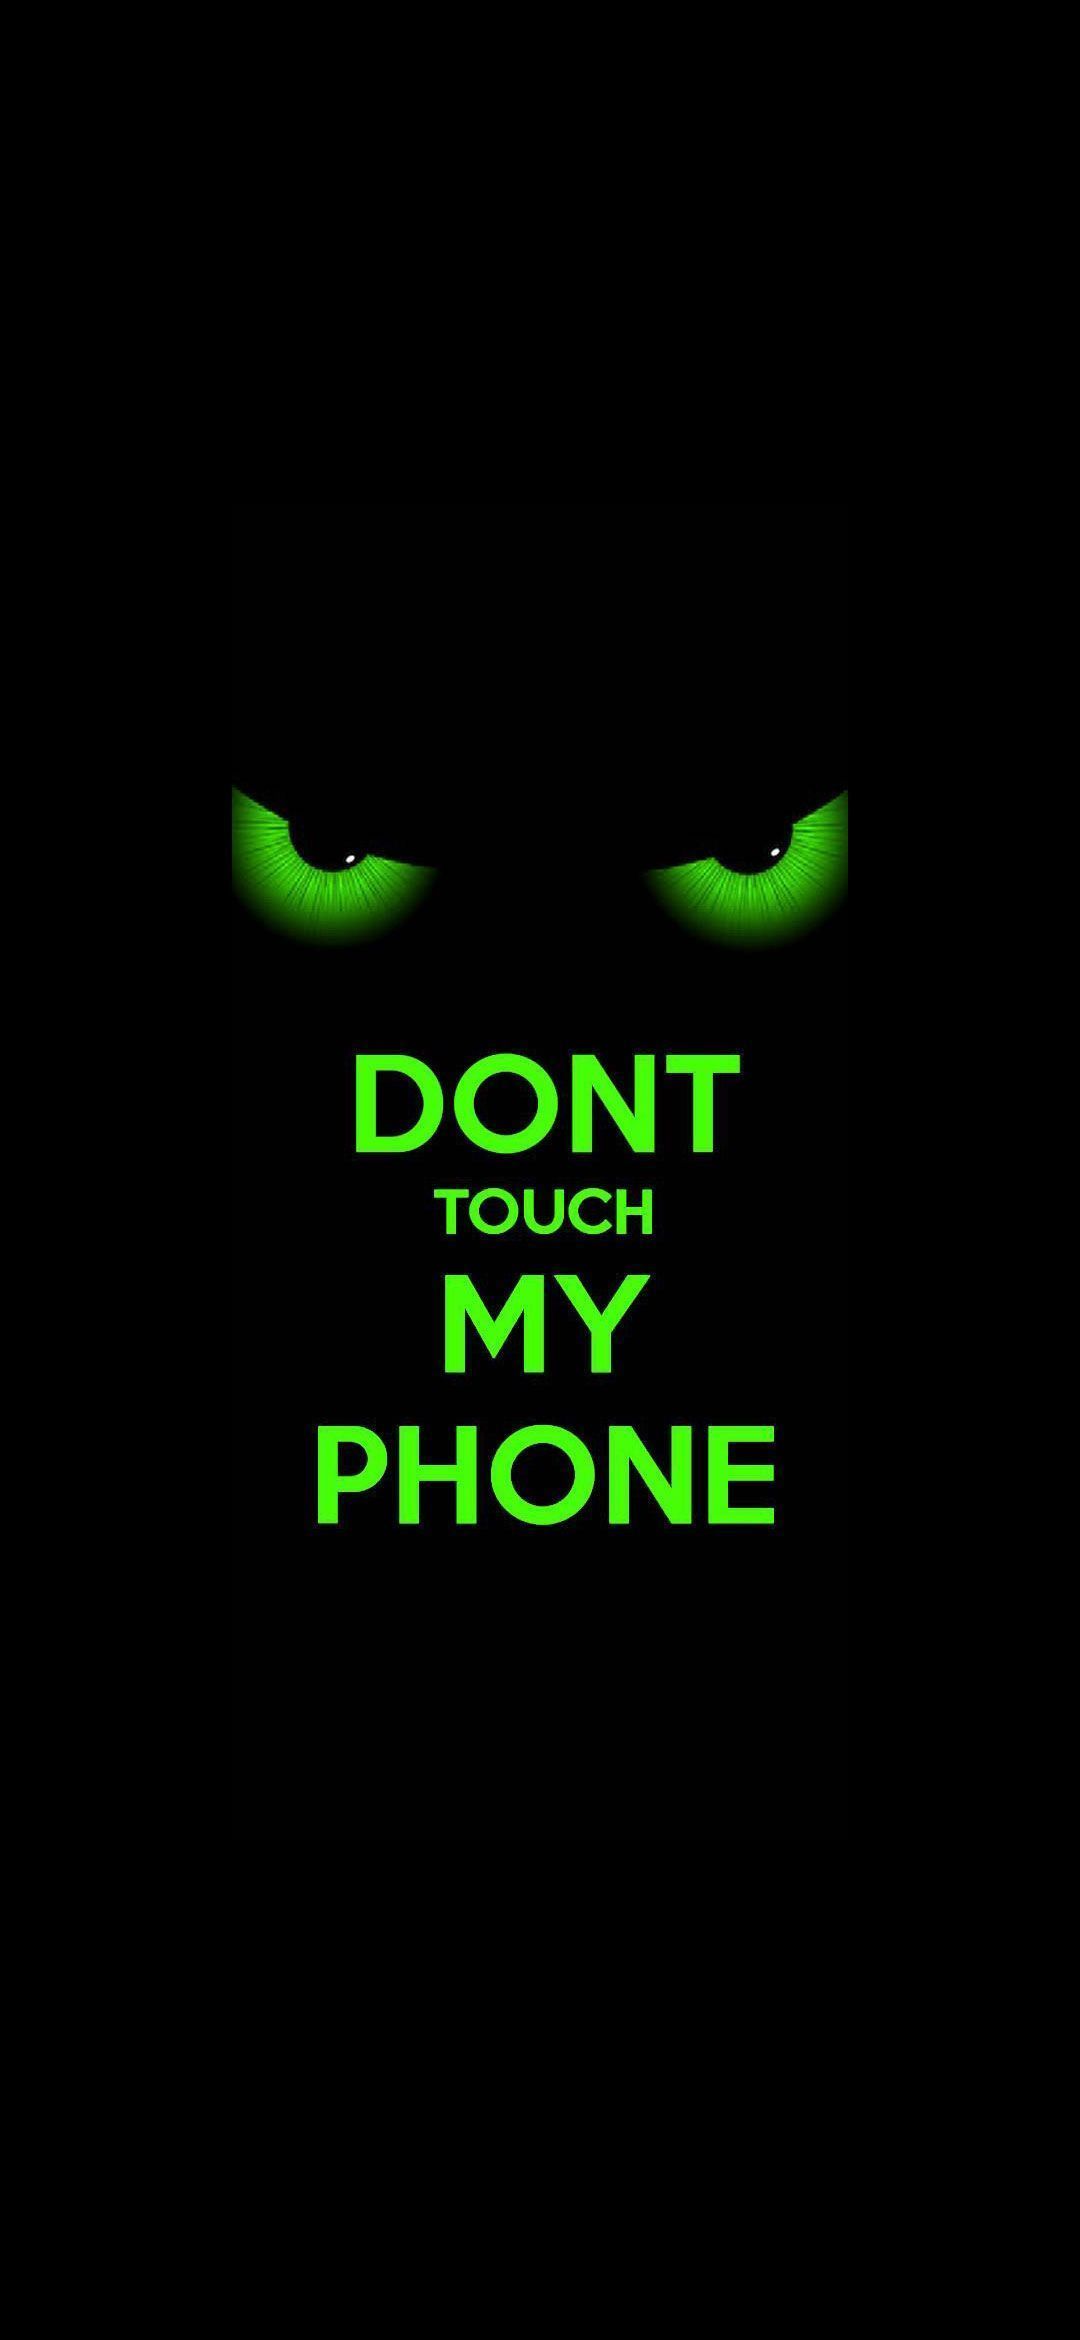 Hacker Dont Touch My Phone Wallpaper Kolpaper Awesome Free Hd Wallpapers